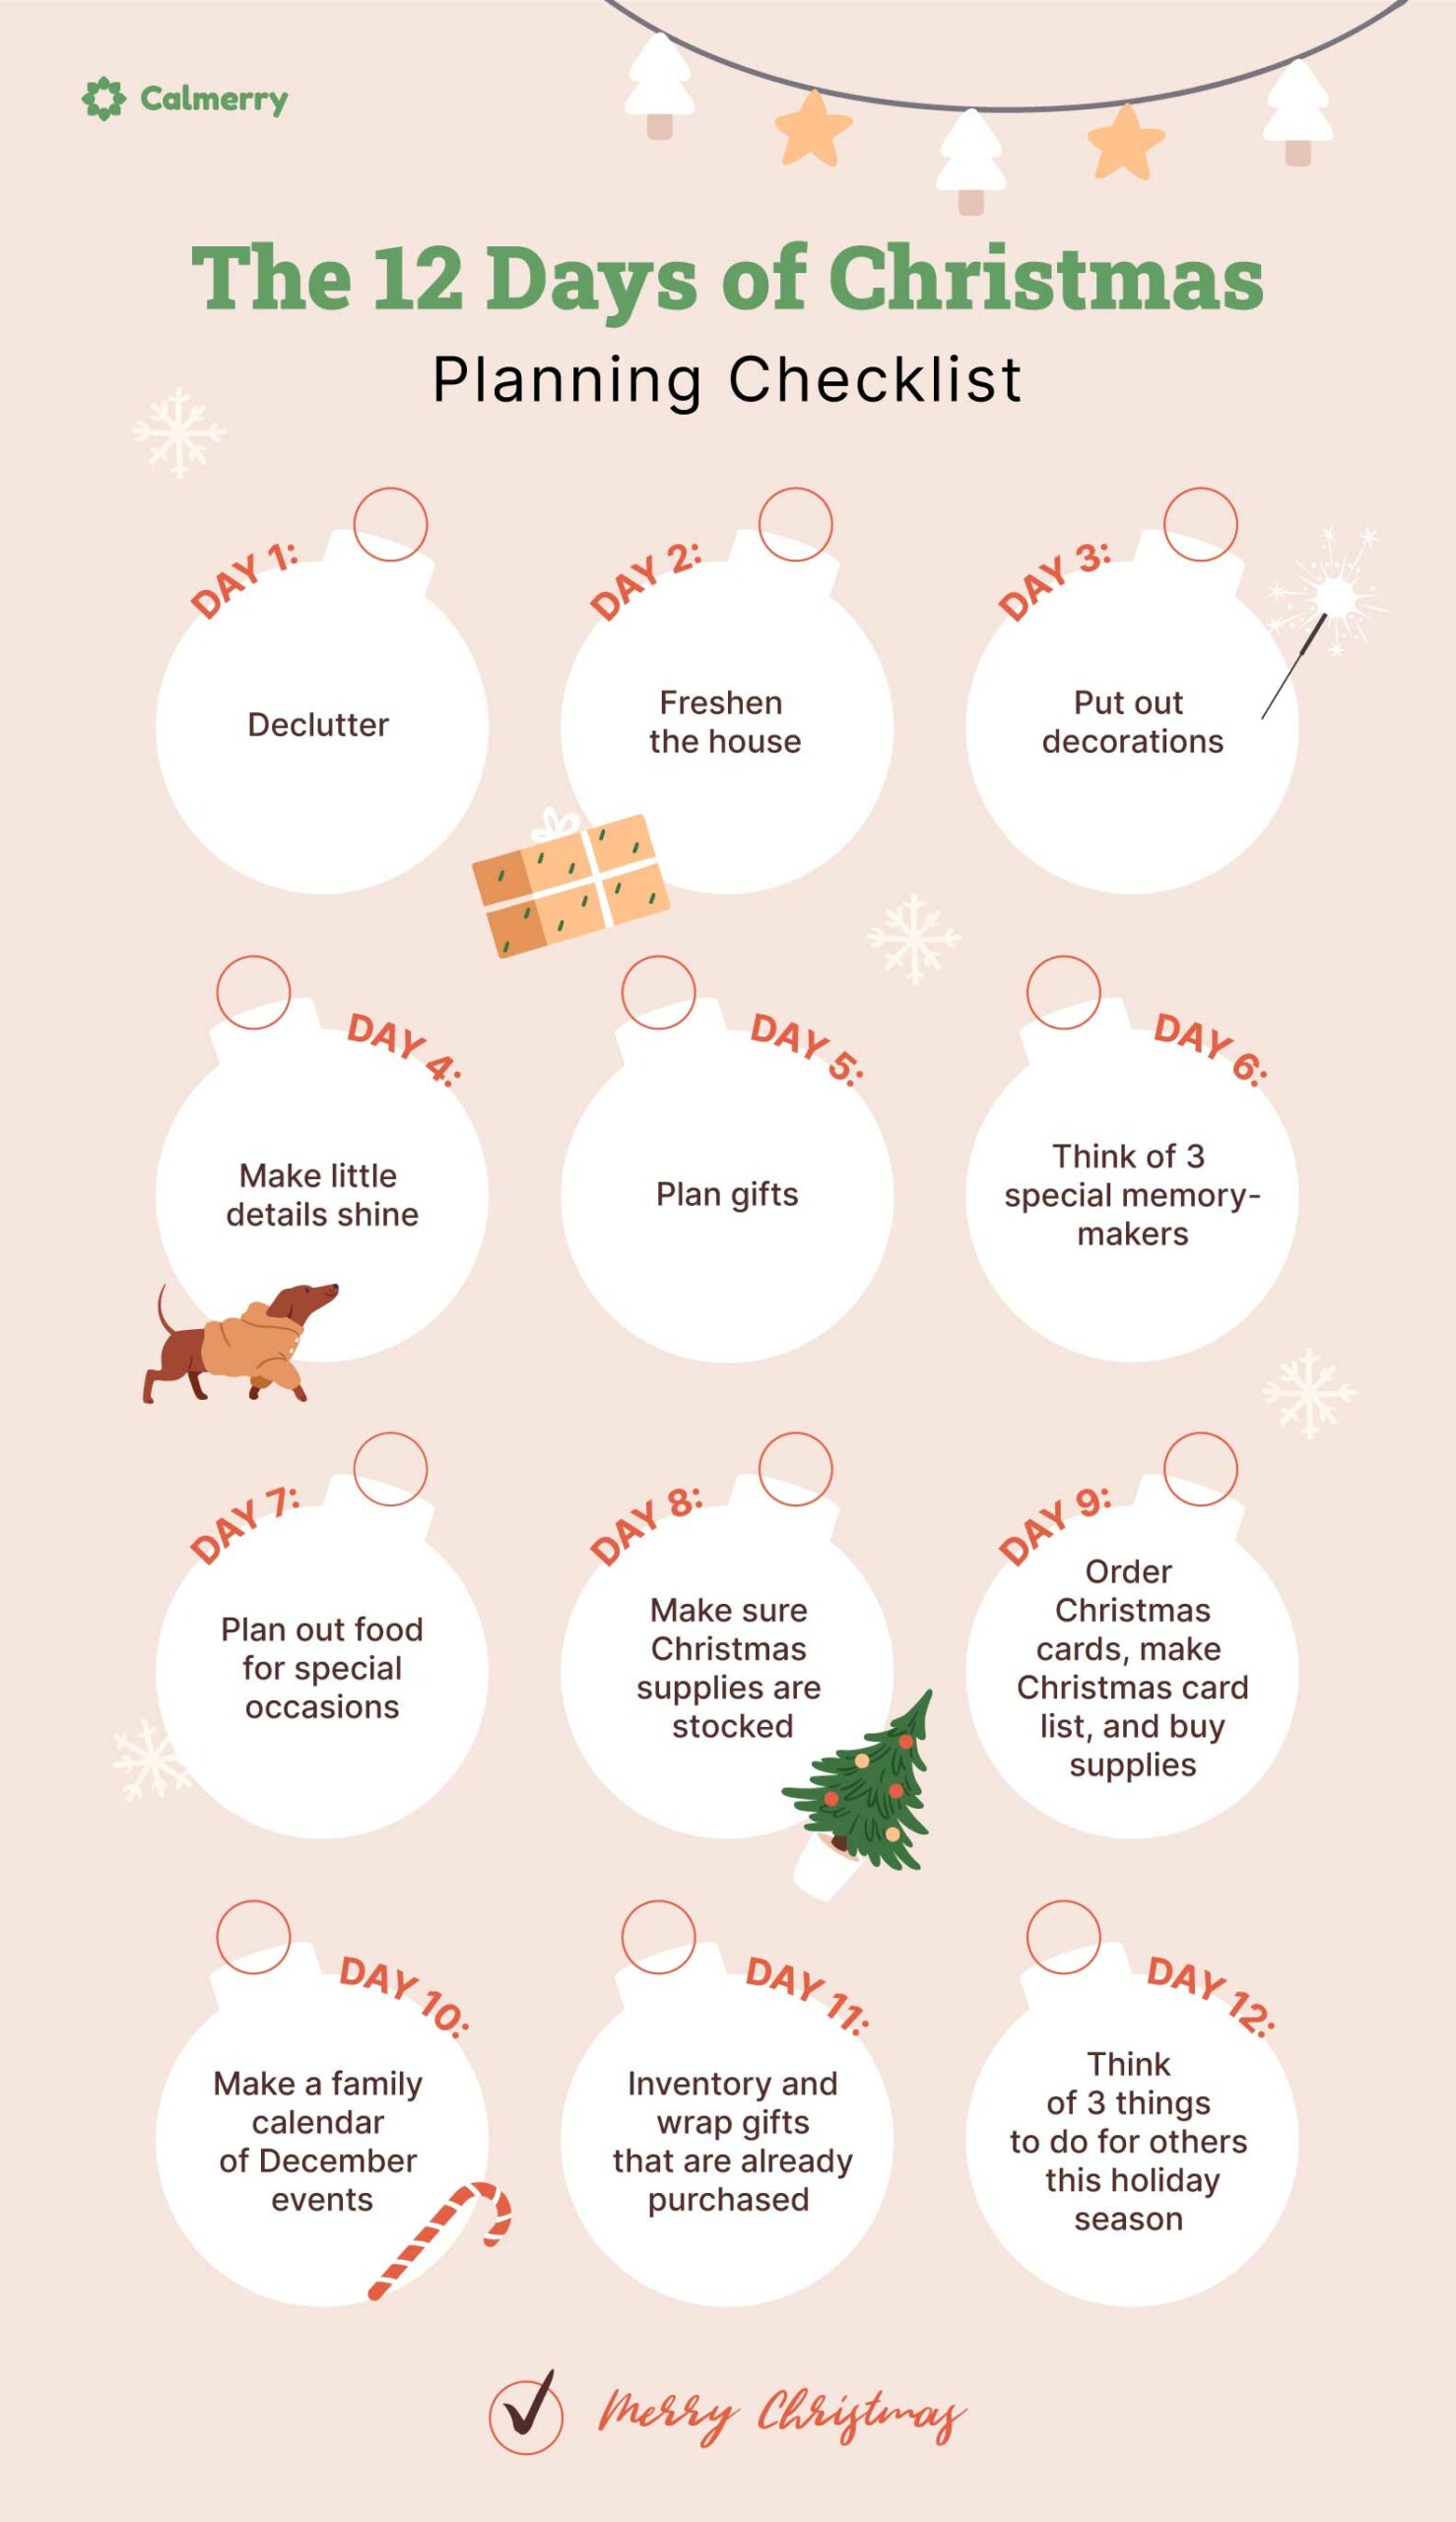 The 12 of Christmas planning checklist